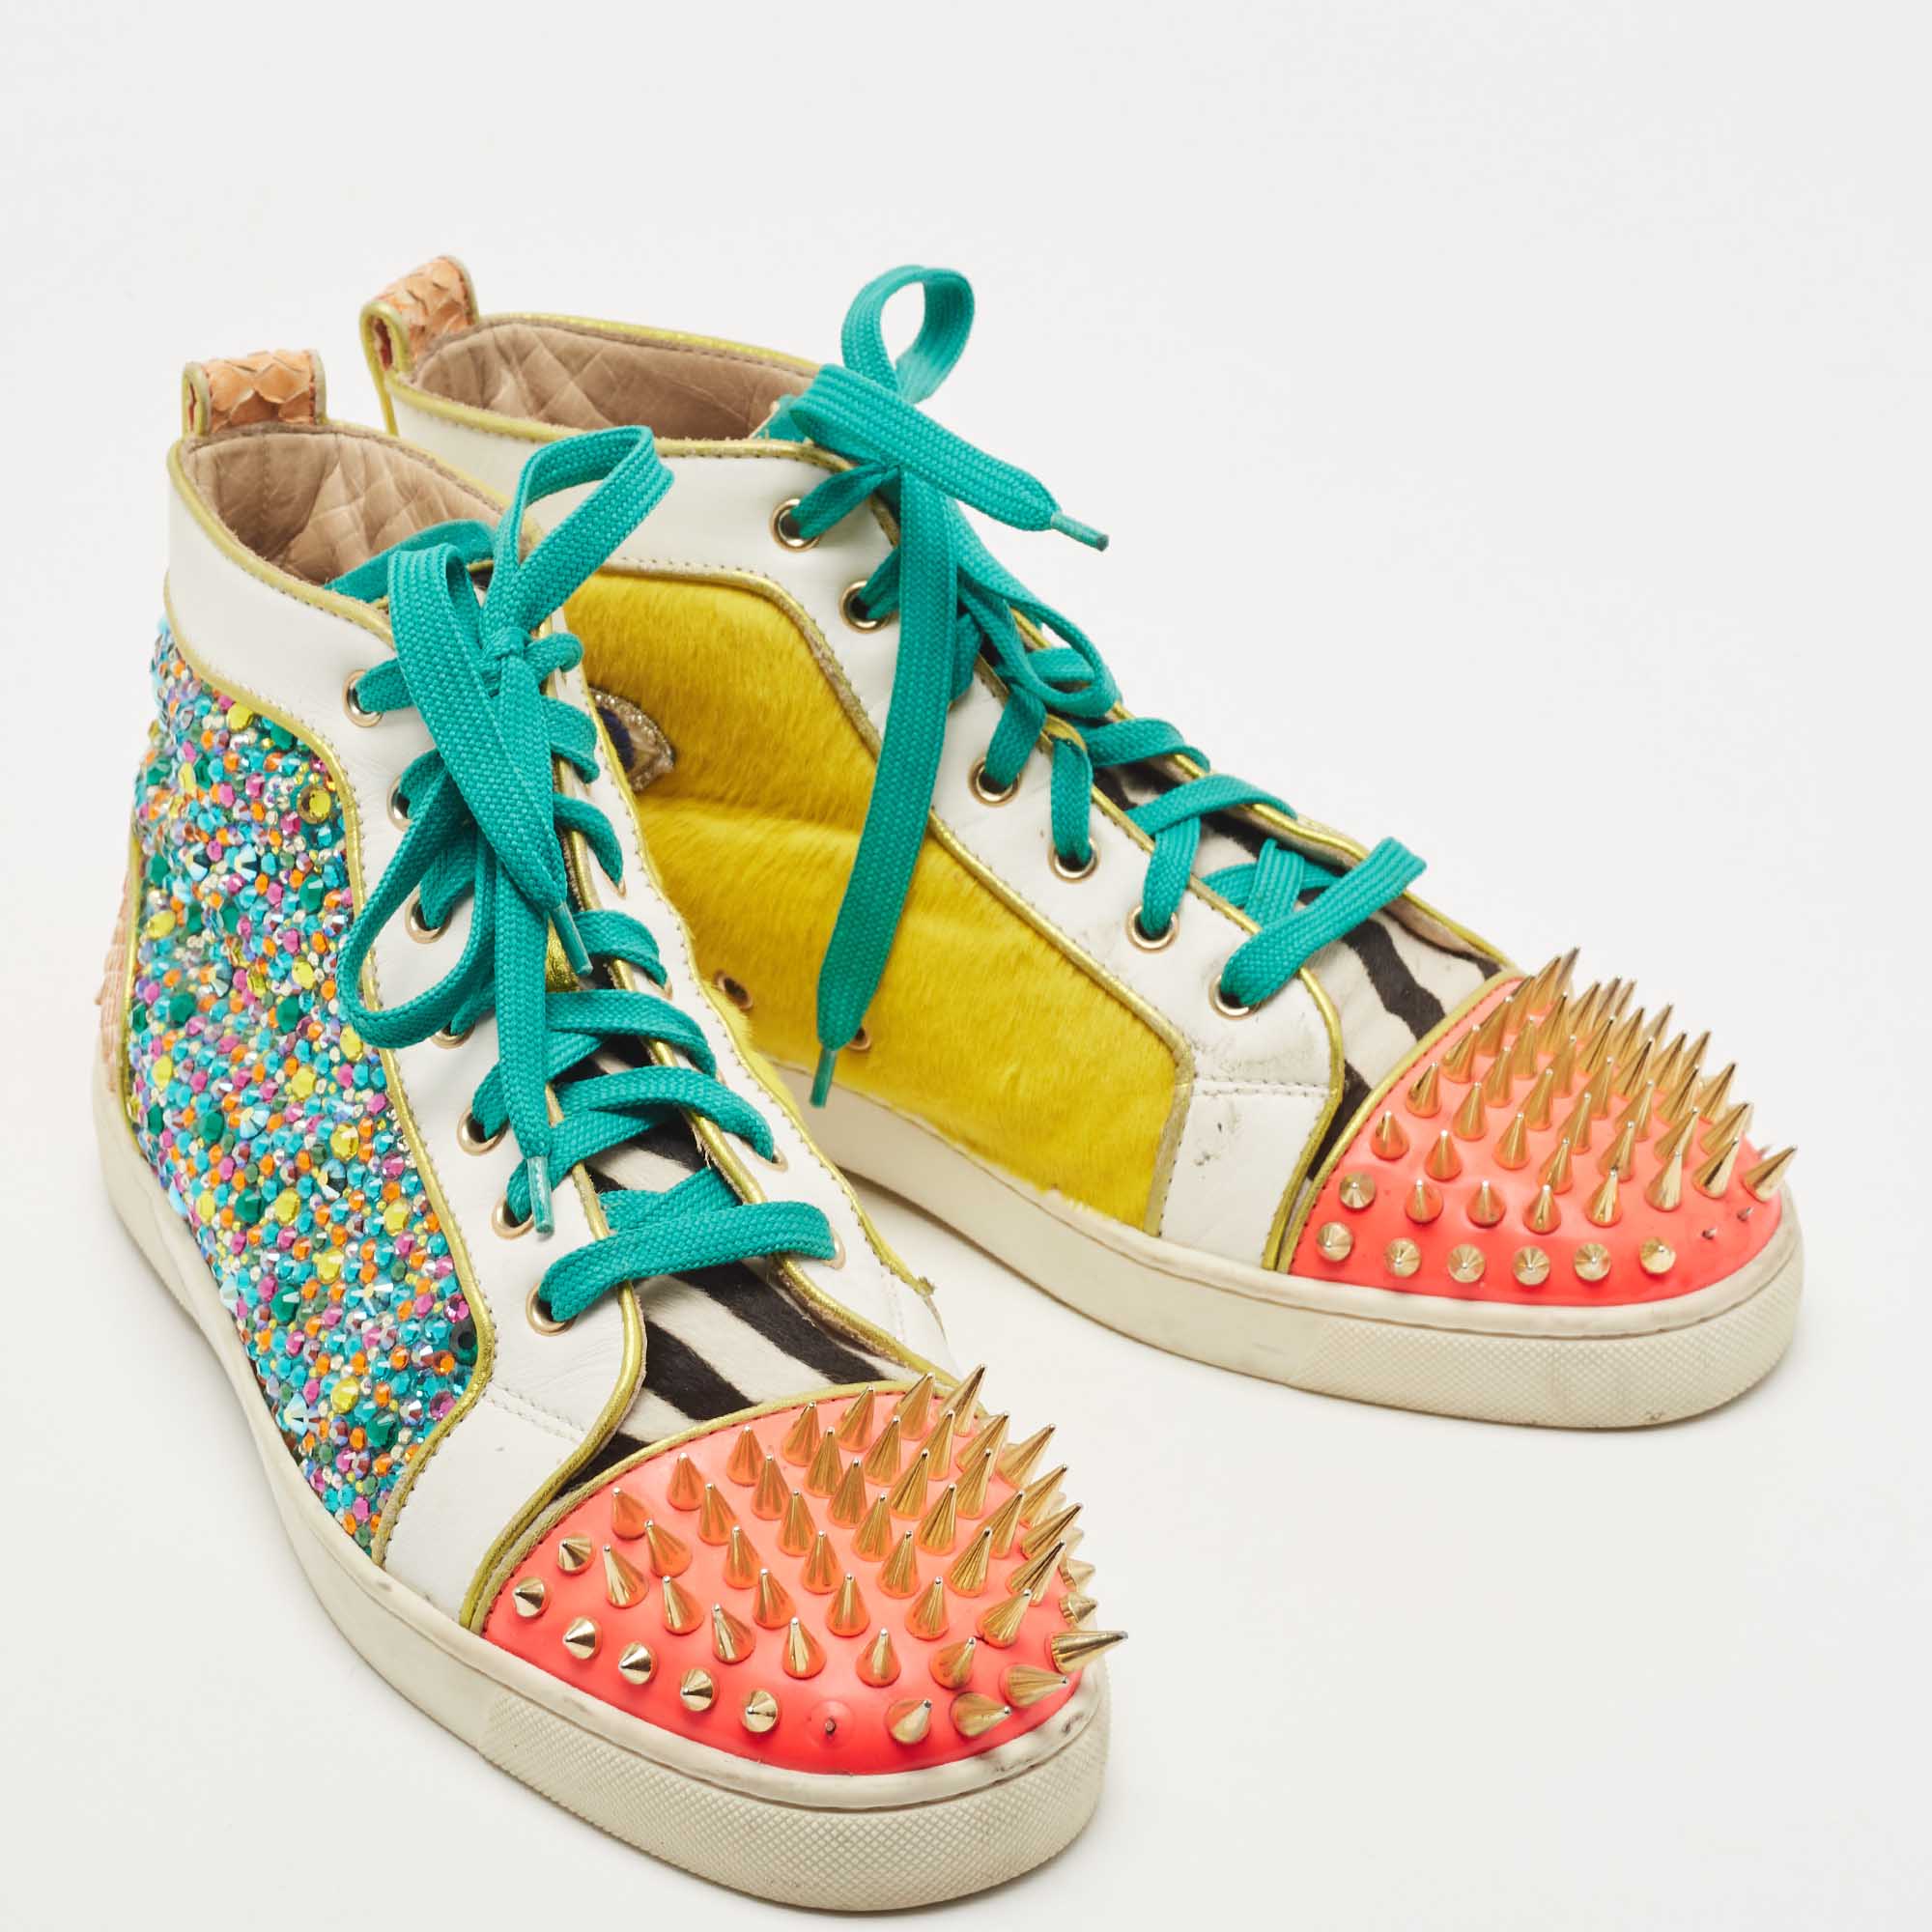 Christian Louboutin Multicolor Crystal Embellished Suede, Calf Hair And Patent Leather No Limit Spikes Sneakers Size 43